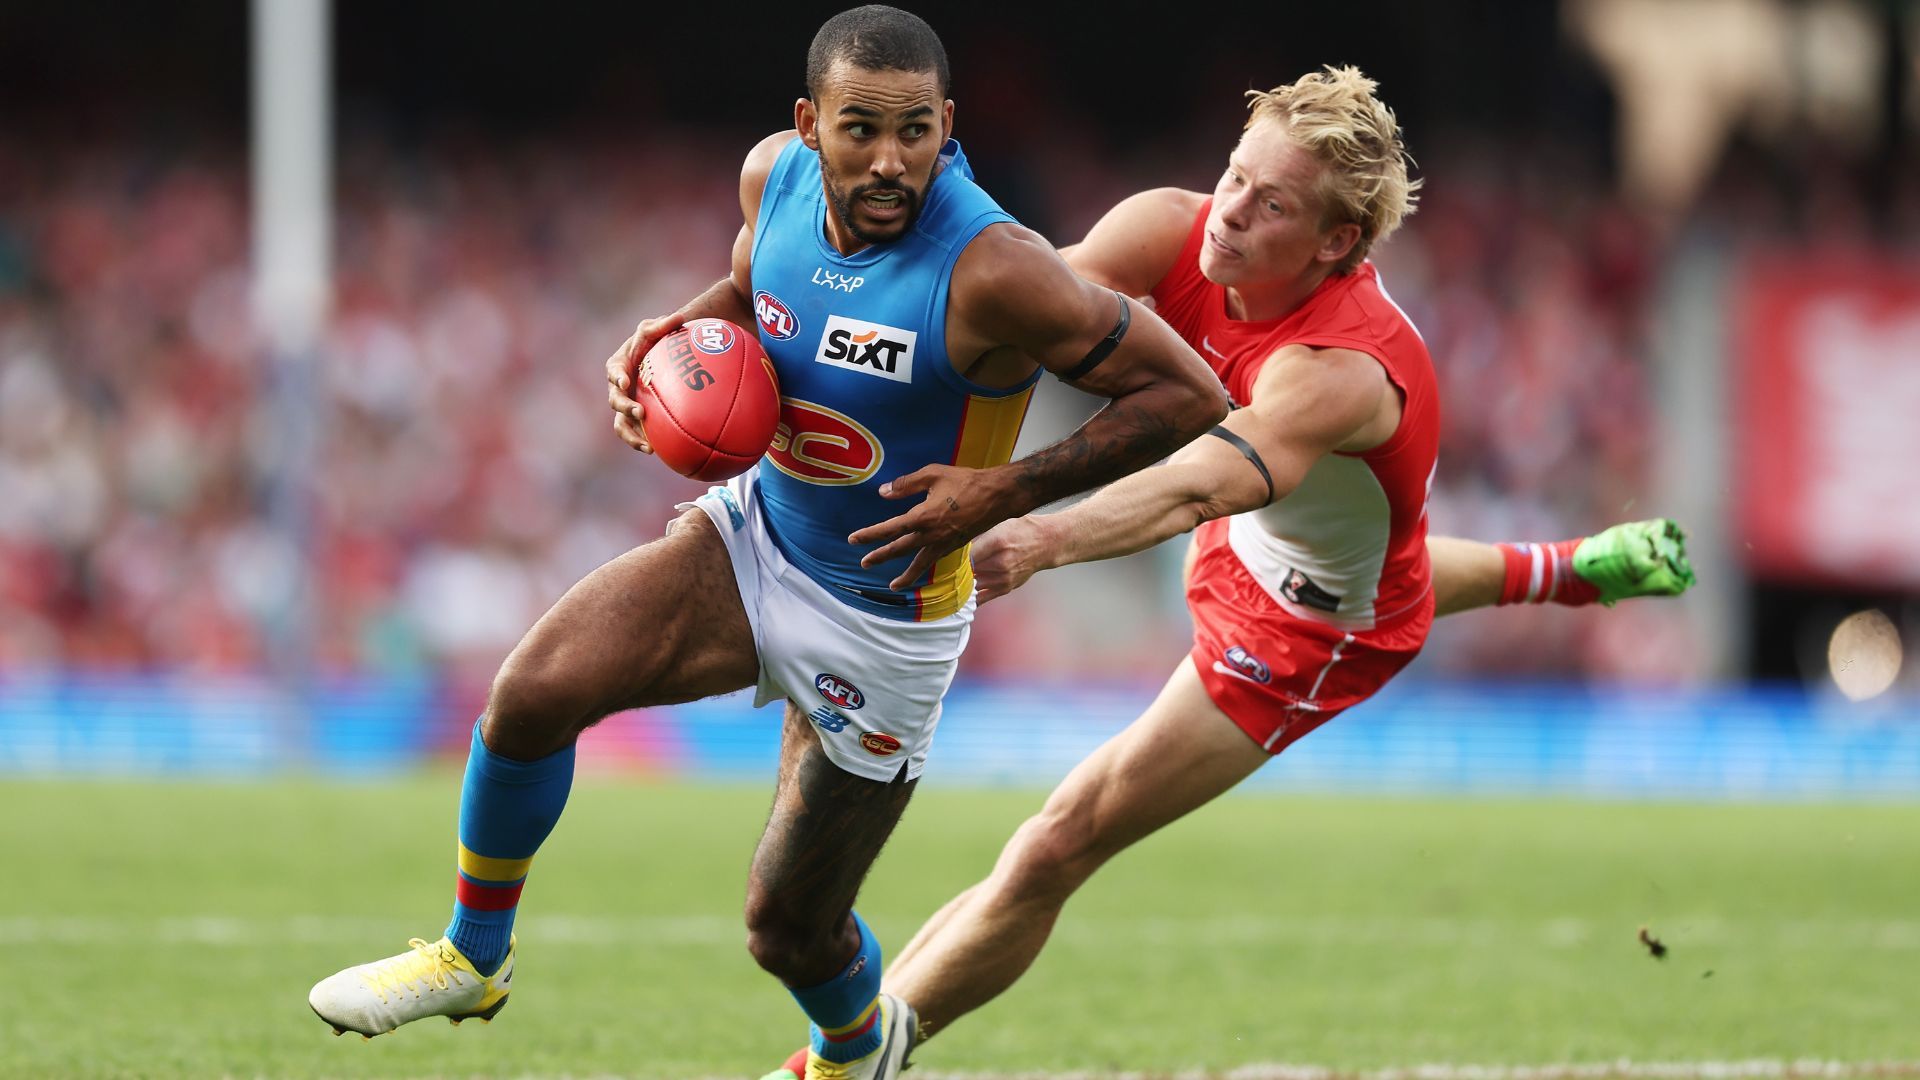 How to watch today’s Gold Coast Suns vs West Coast AFL match: Livestream, TV channel, and start time | Goal.com Australia